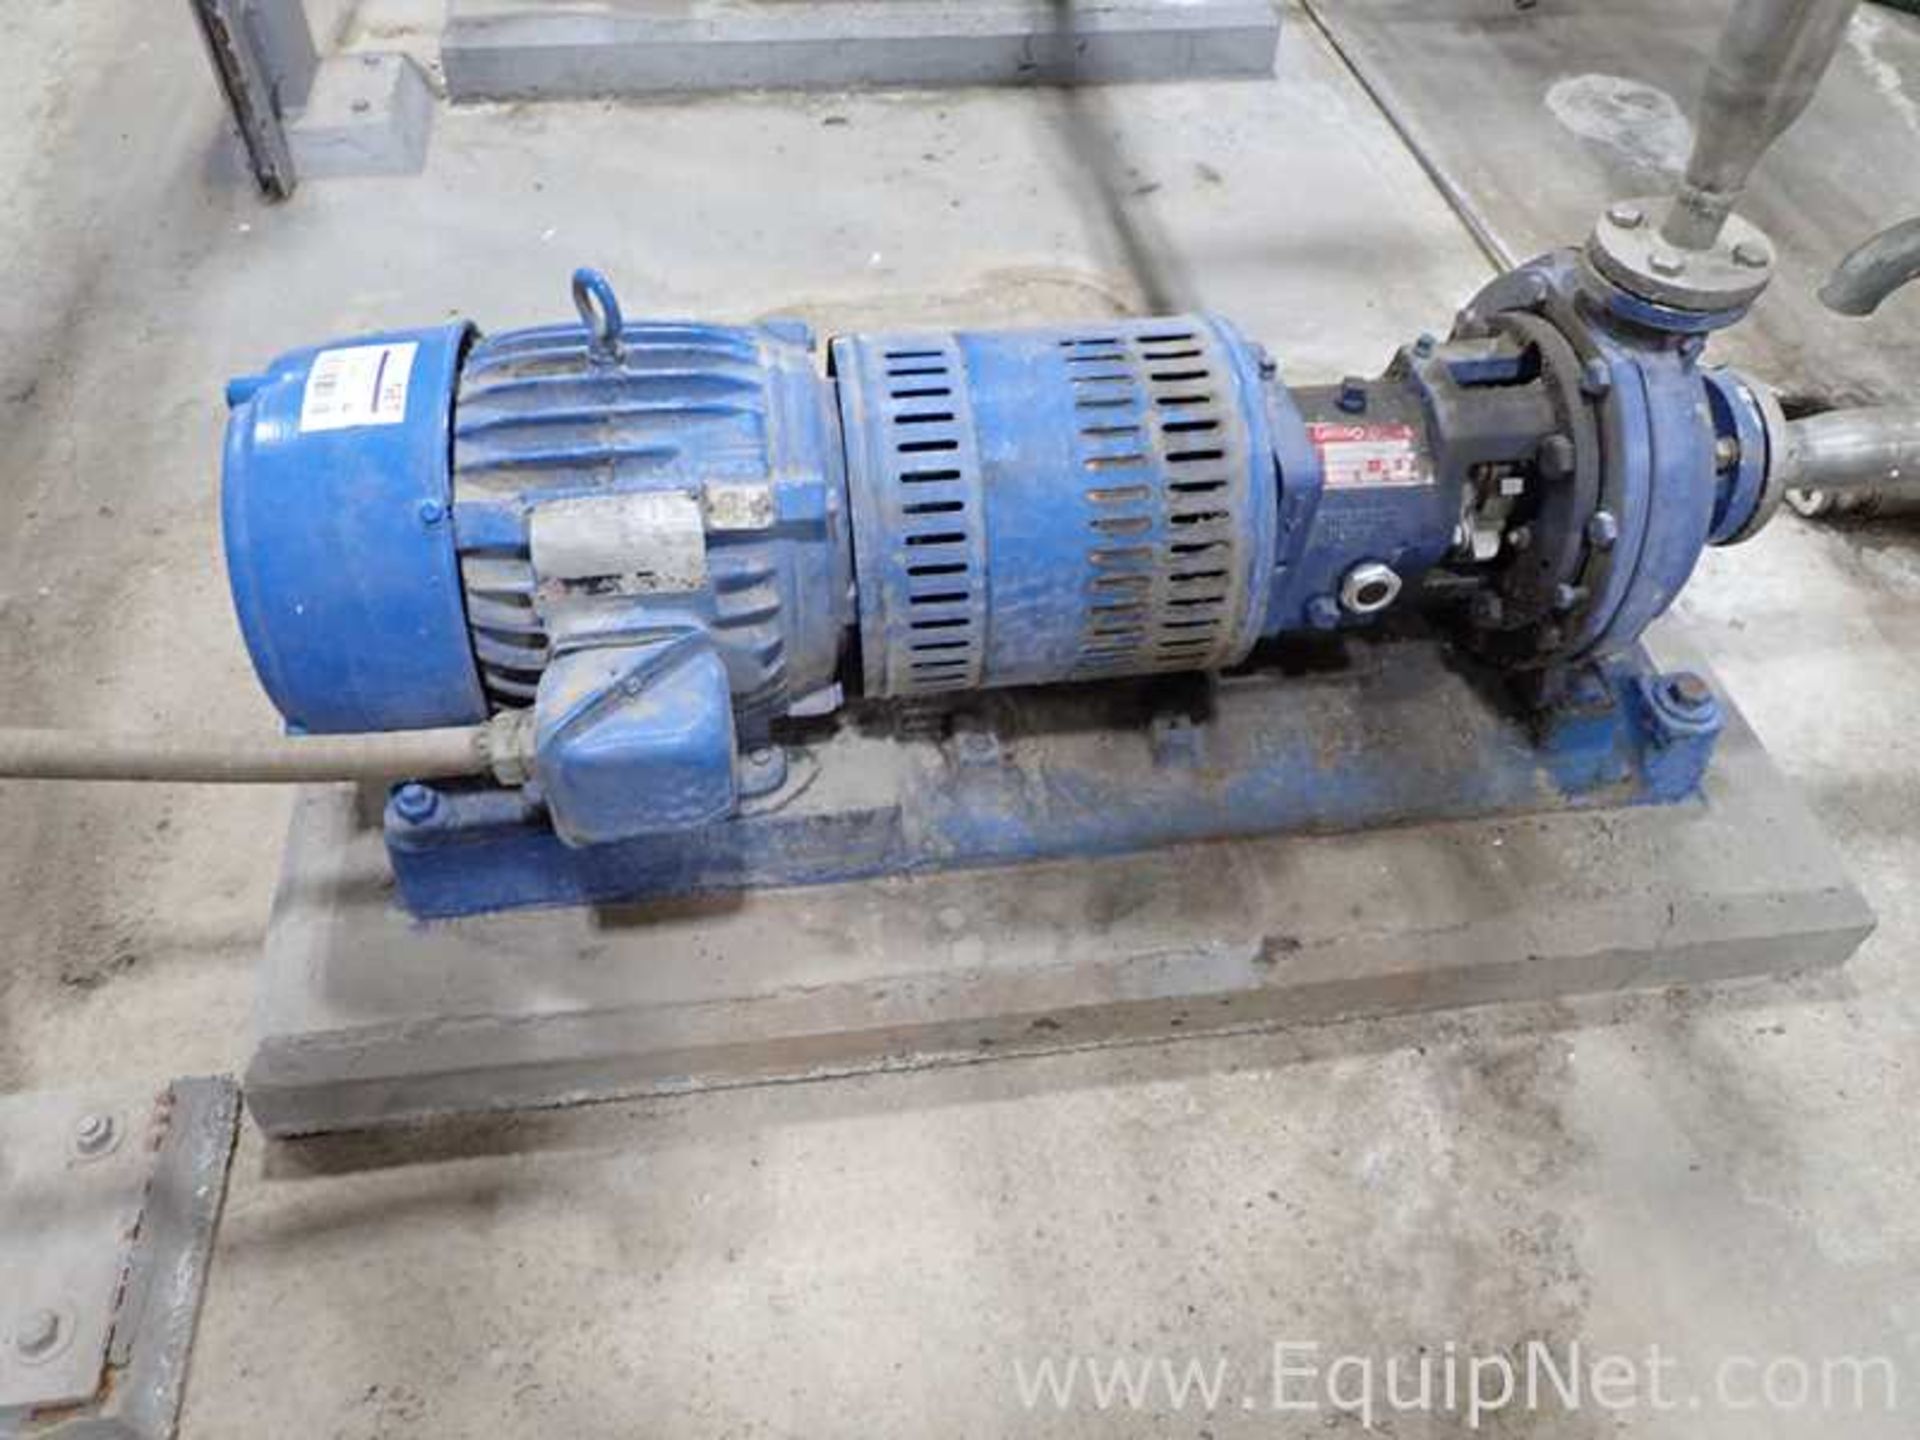 Lot of 1 Gould 7.5 HP Centrifugal Pump and 1 Griswold 7.5 HP Centrifugal Pump - Image 2 of 7